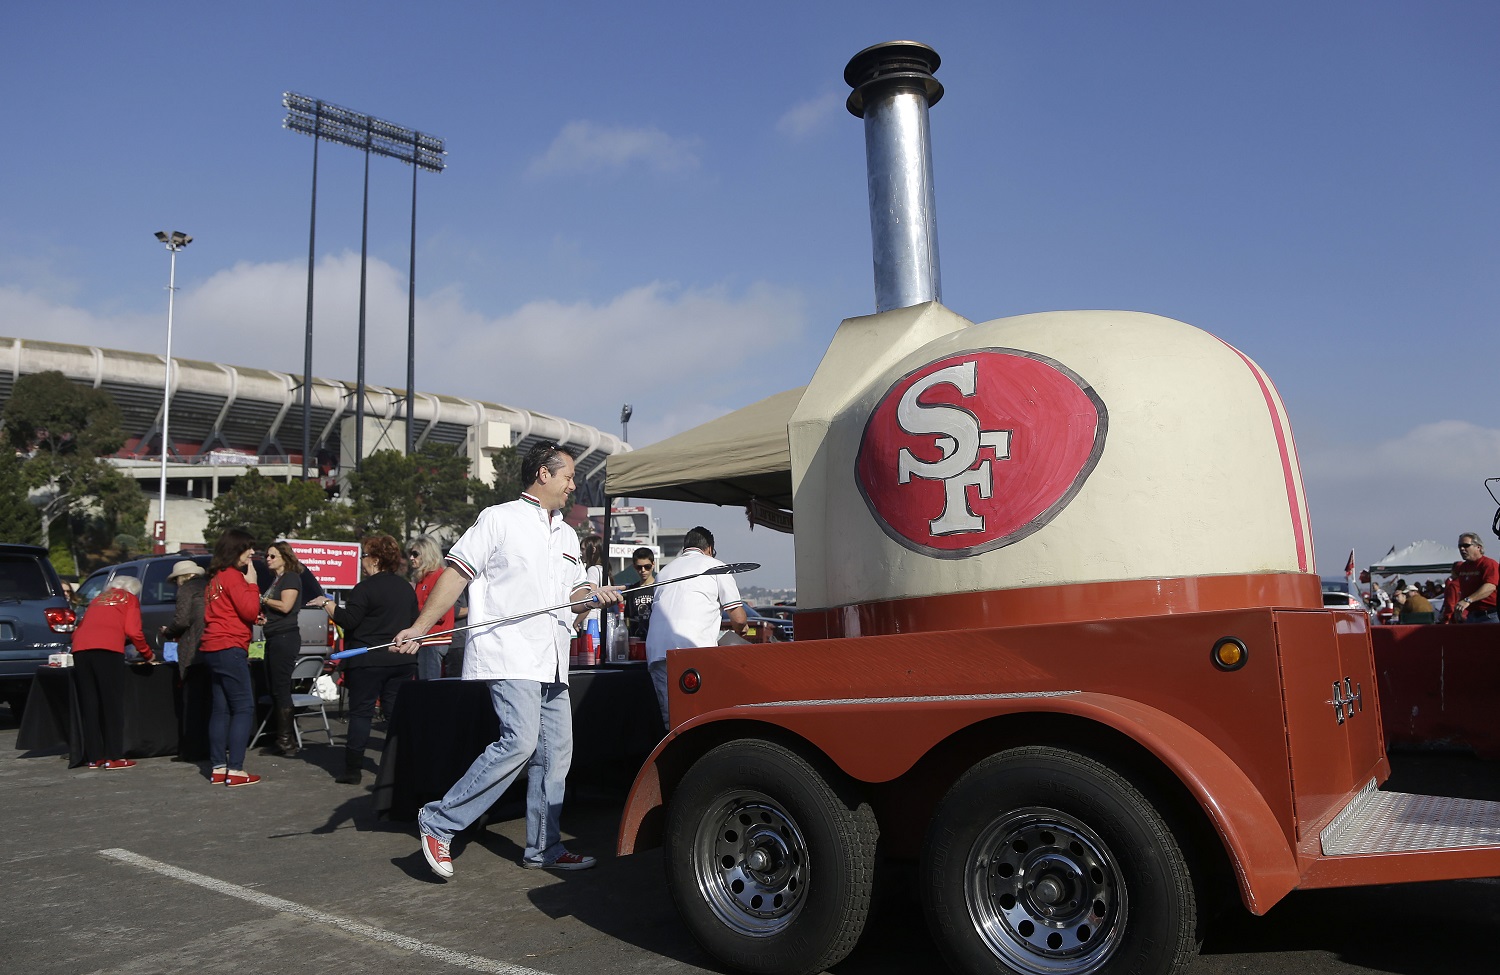 Jeff Taurian cooks a pizza in the Rolling In Dough mobile pizza truck from Woodside, Calif., with a San Francisco 49ers logo painted on the side, in the Candlestick Park parking lot before an NFL football game between the San Francisco 49ers and the Carolina Panthers in San Francisco, Sunday, Nov. 10, 2013. (AP Photo/Jeff Chiu)